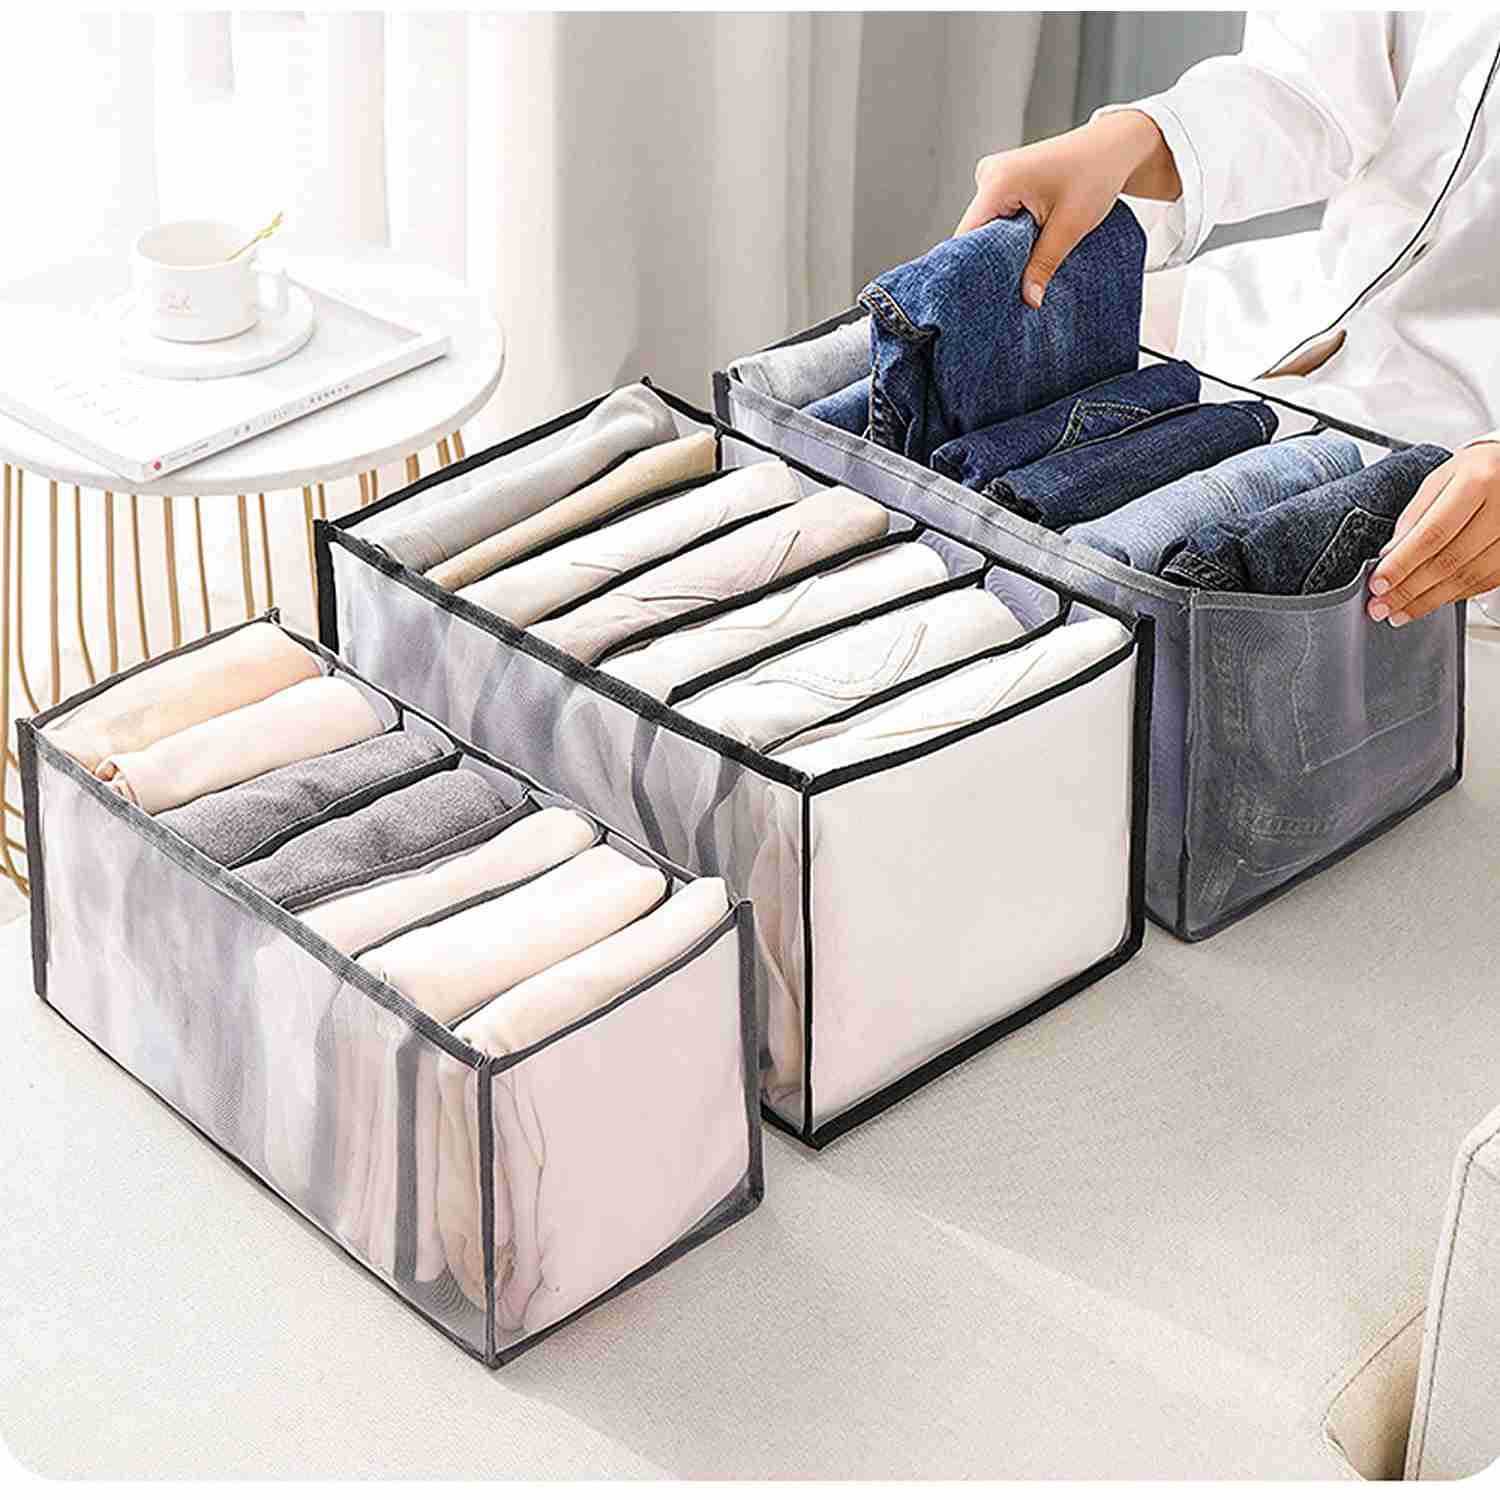 washable-clothes-organizer with discount code